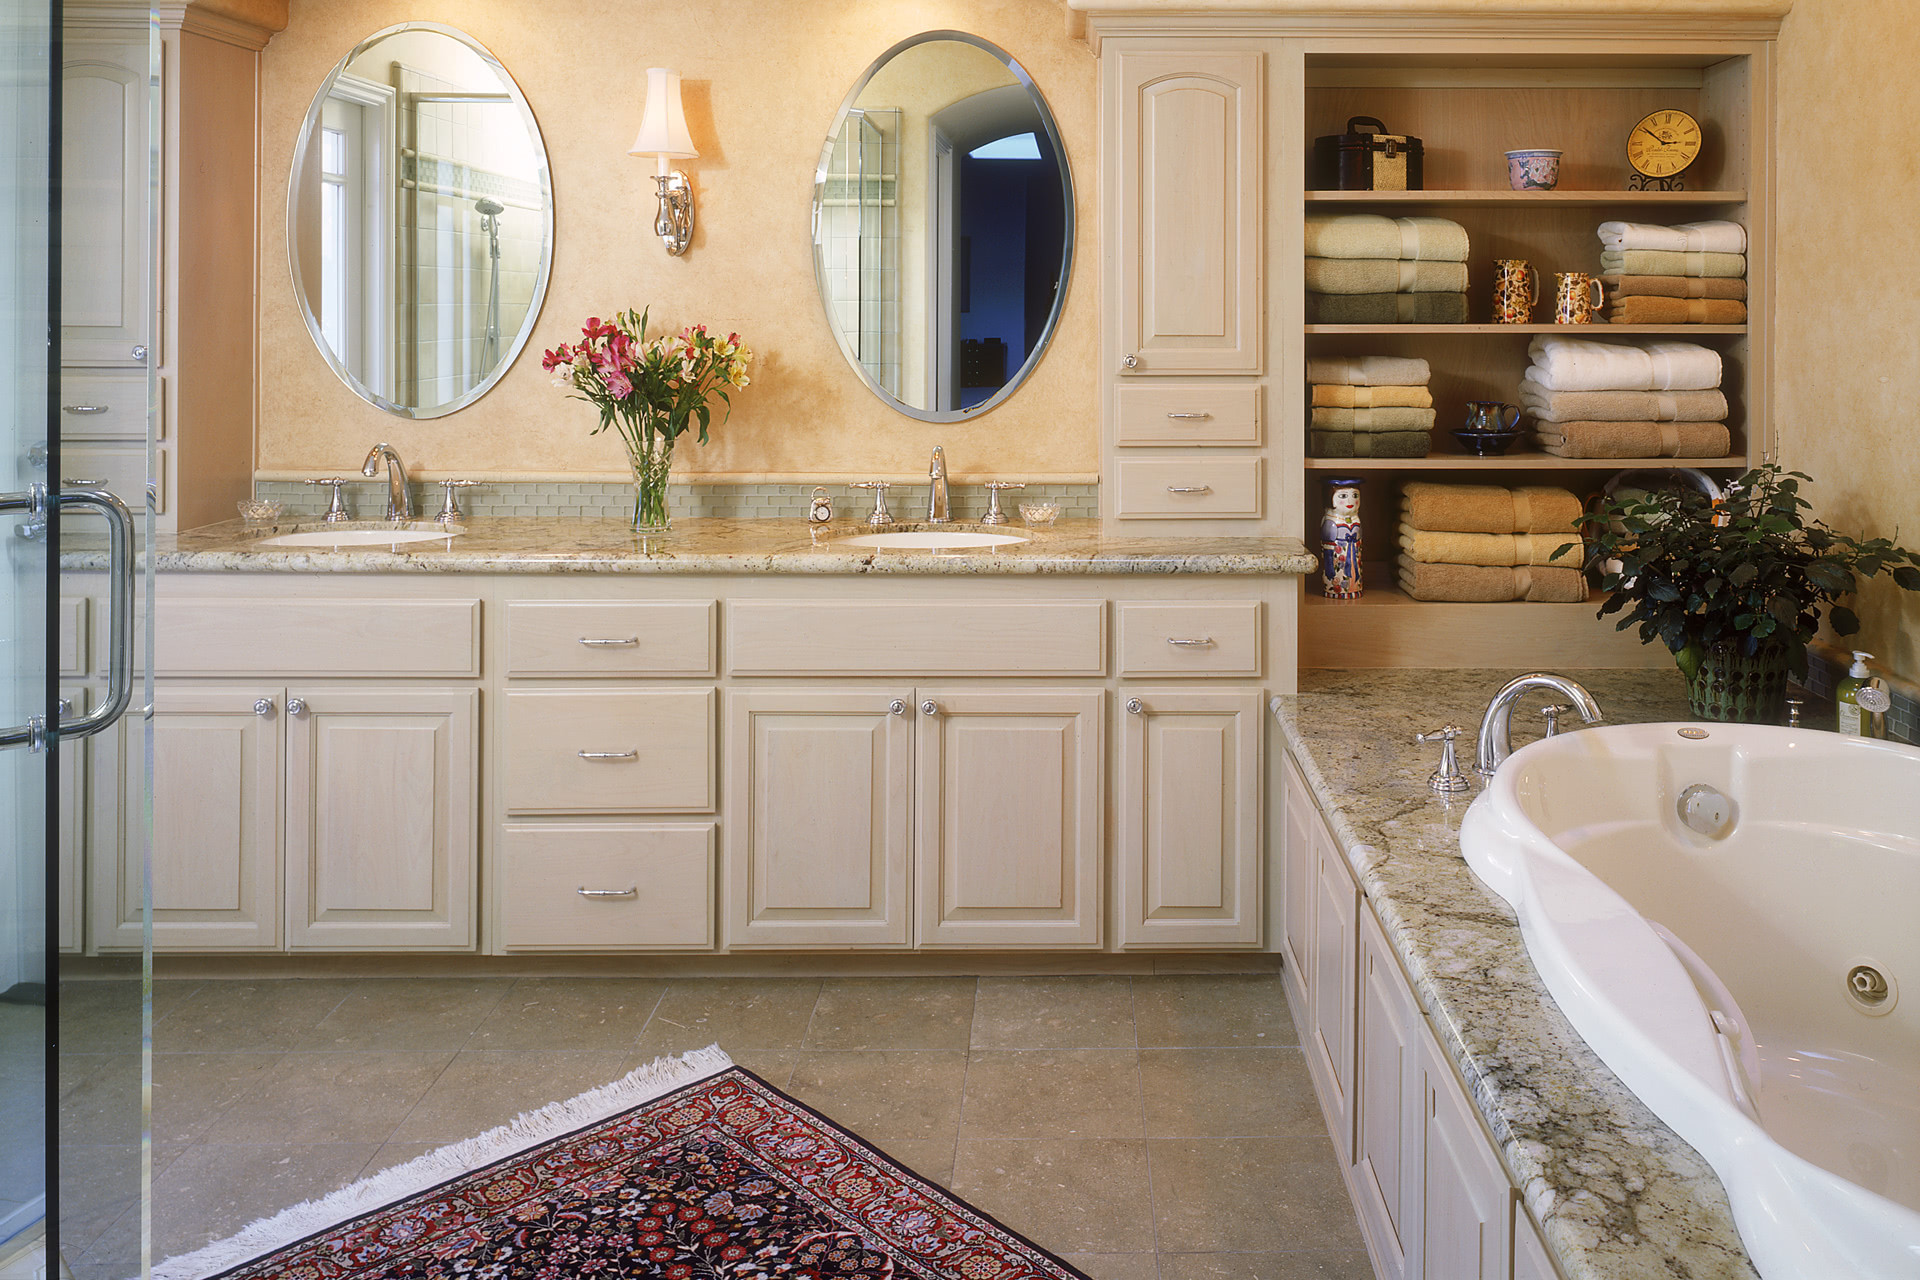 Bathroom Cabinets With Sink
 Custom Bathroom Cabinets Curved Face Sinks Two Level